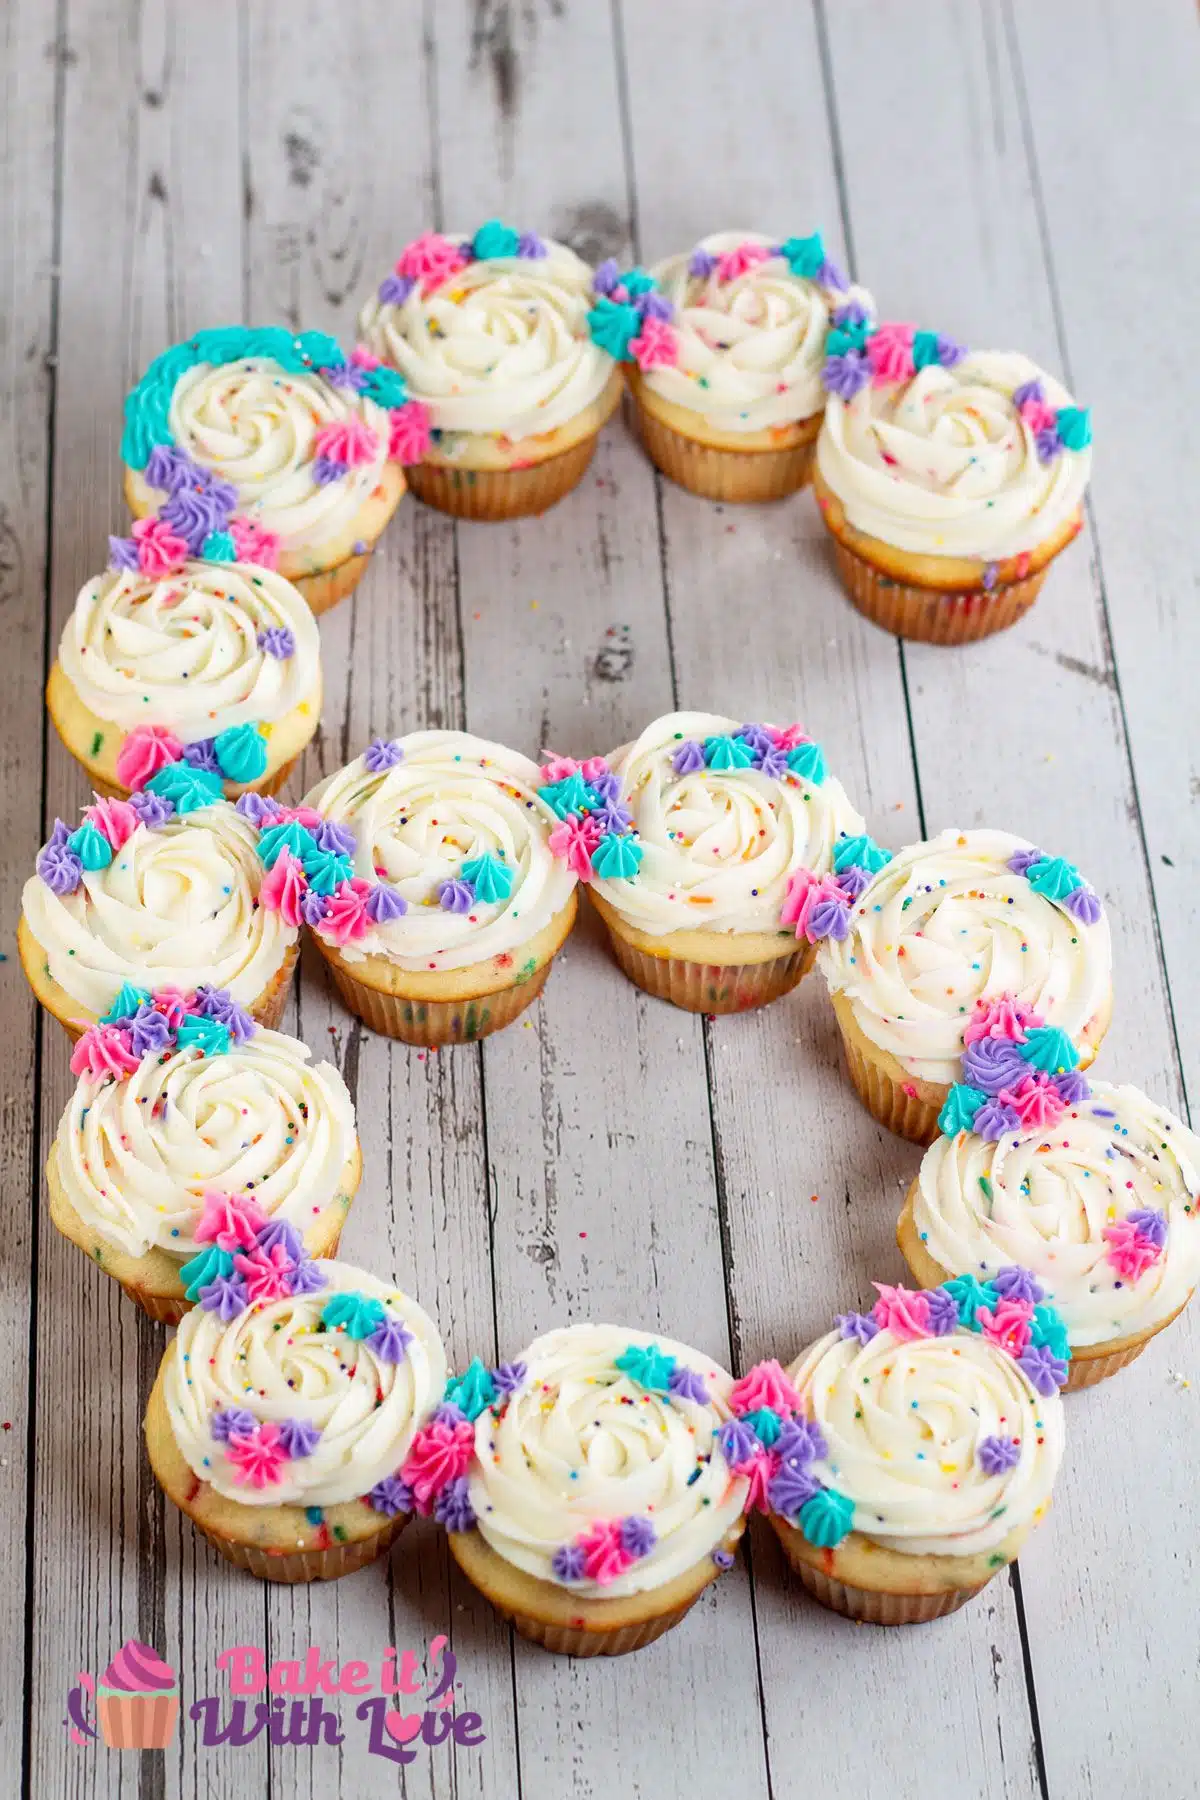 How to make a number cupcake cake for easy pull-apart birthday cakes.